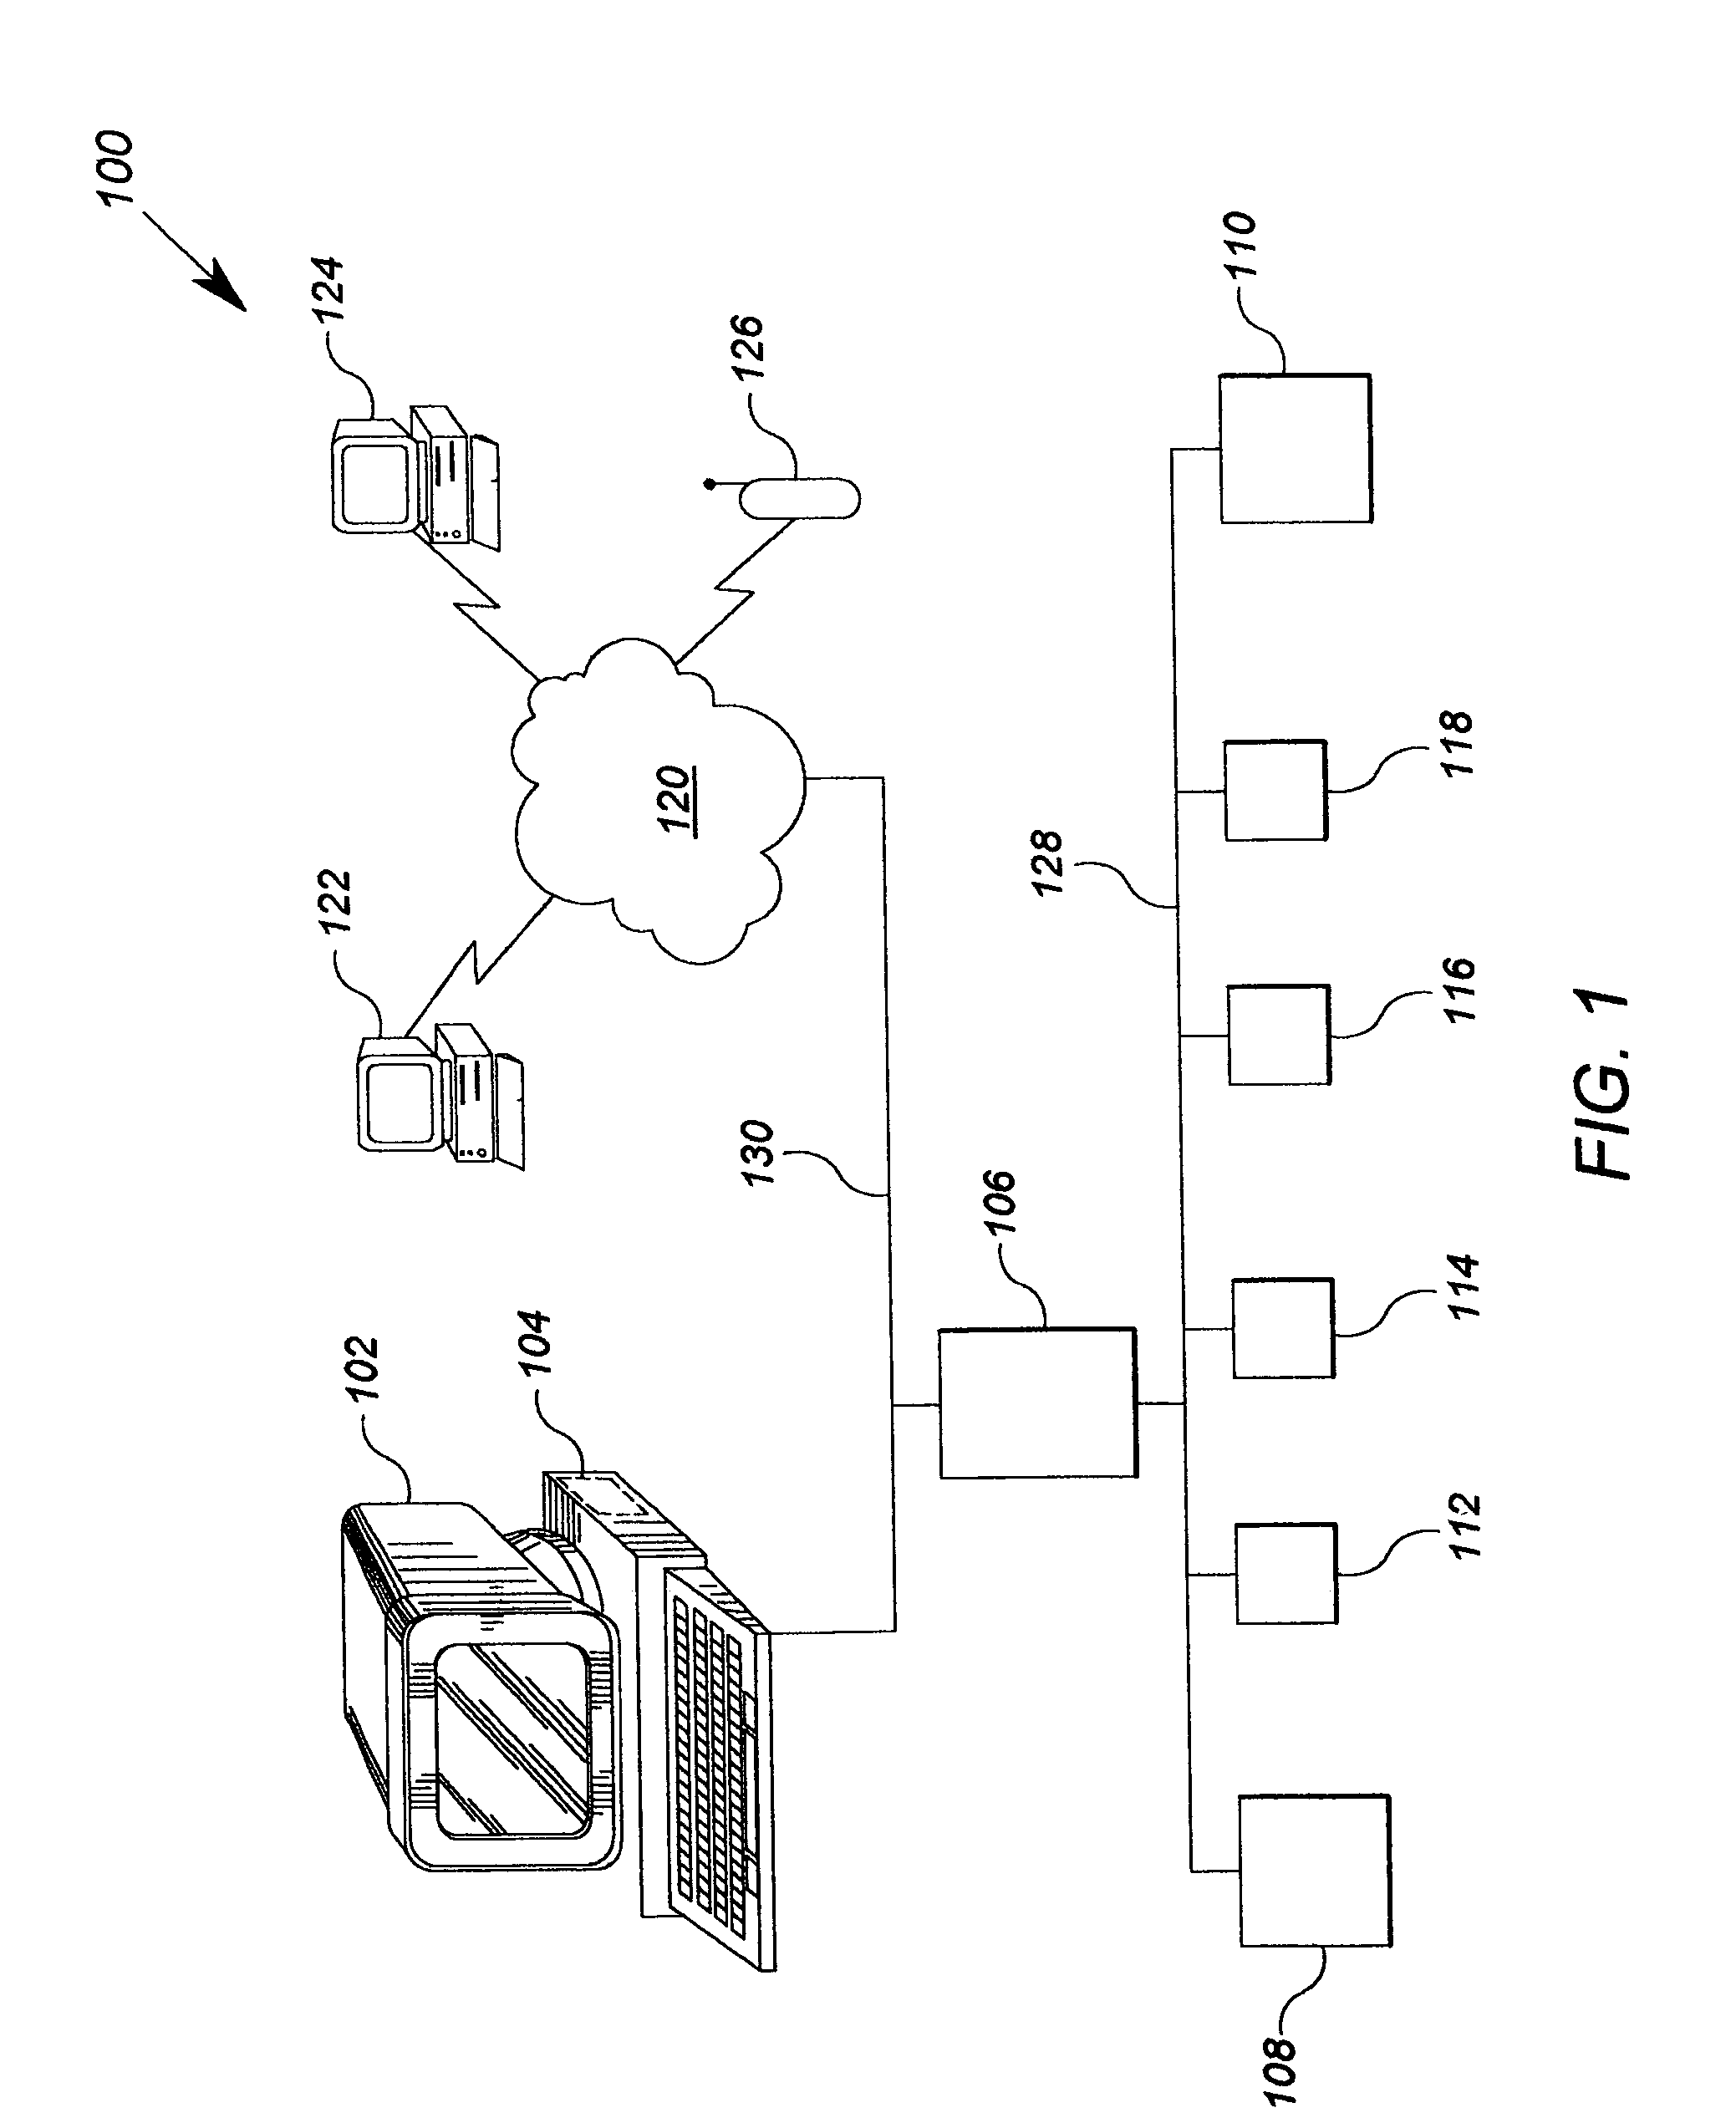 Controller with configurable connections between data processing components